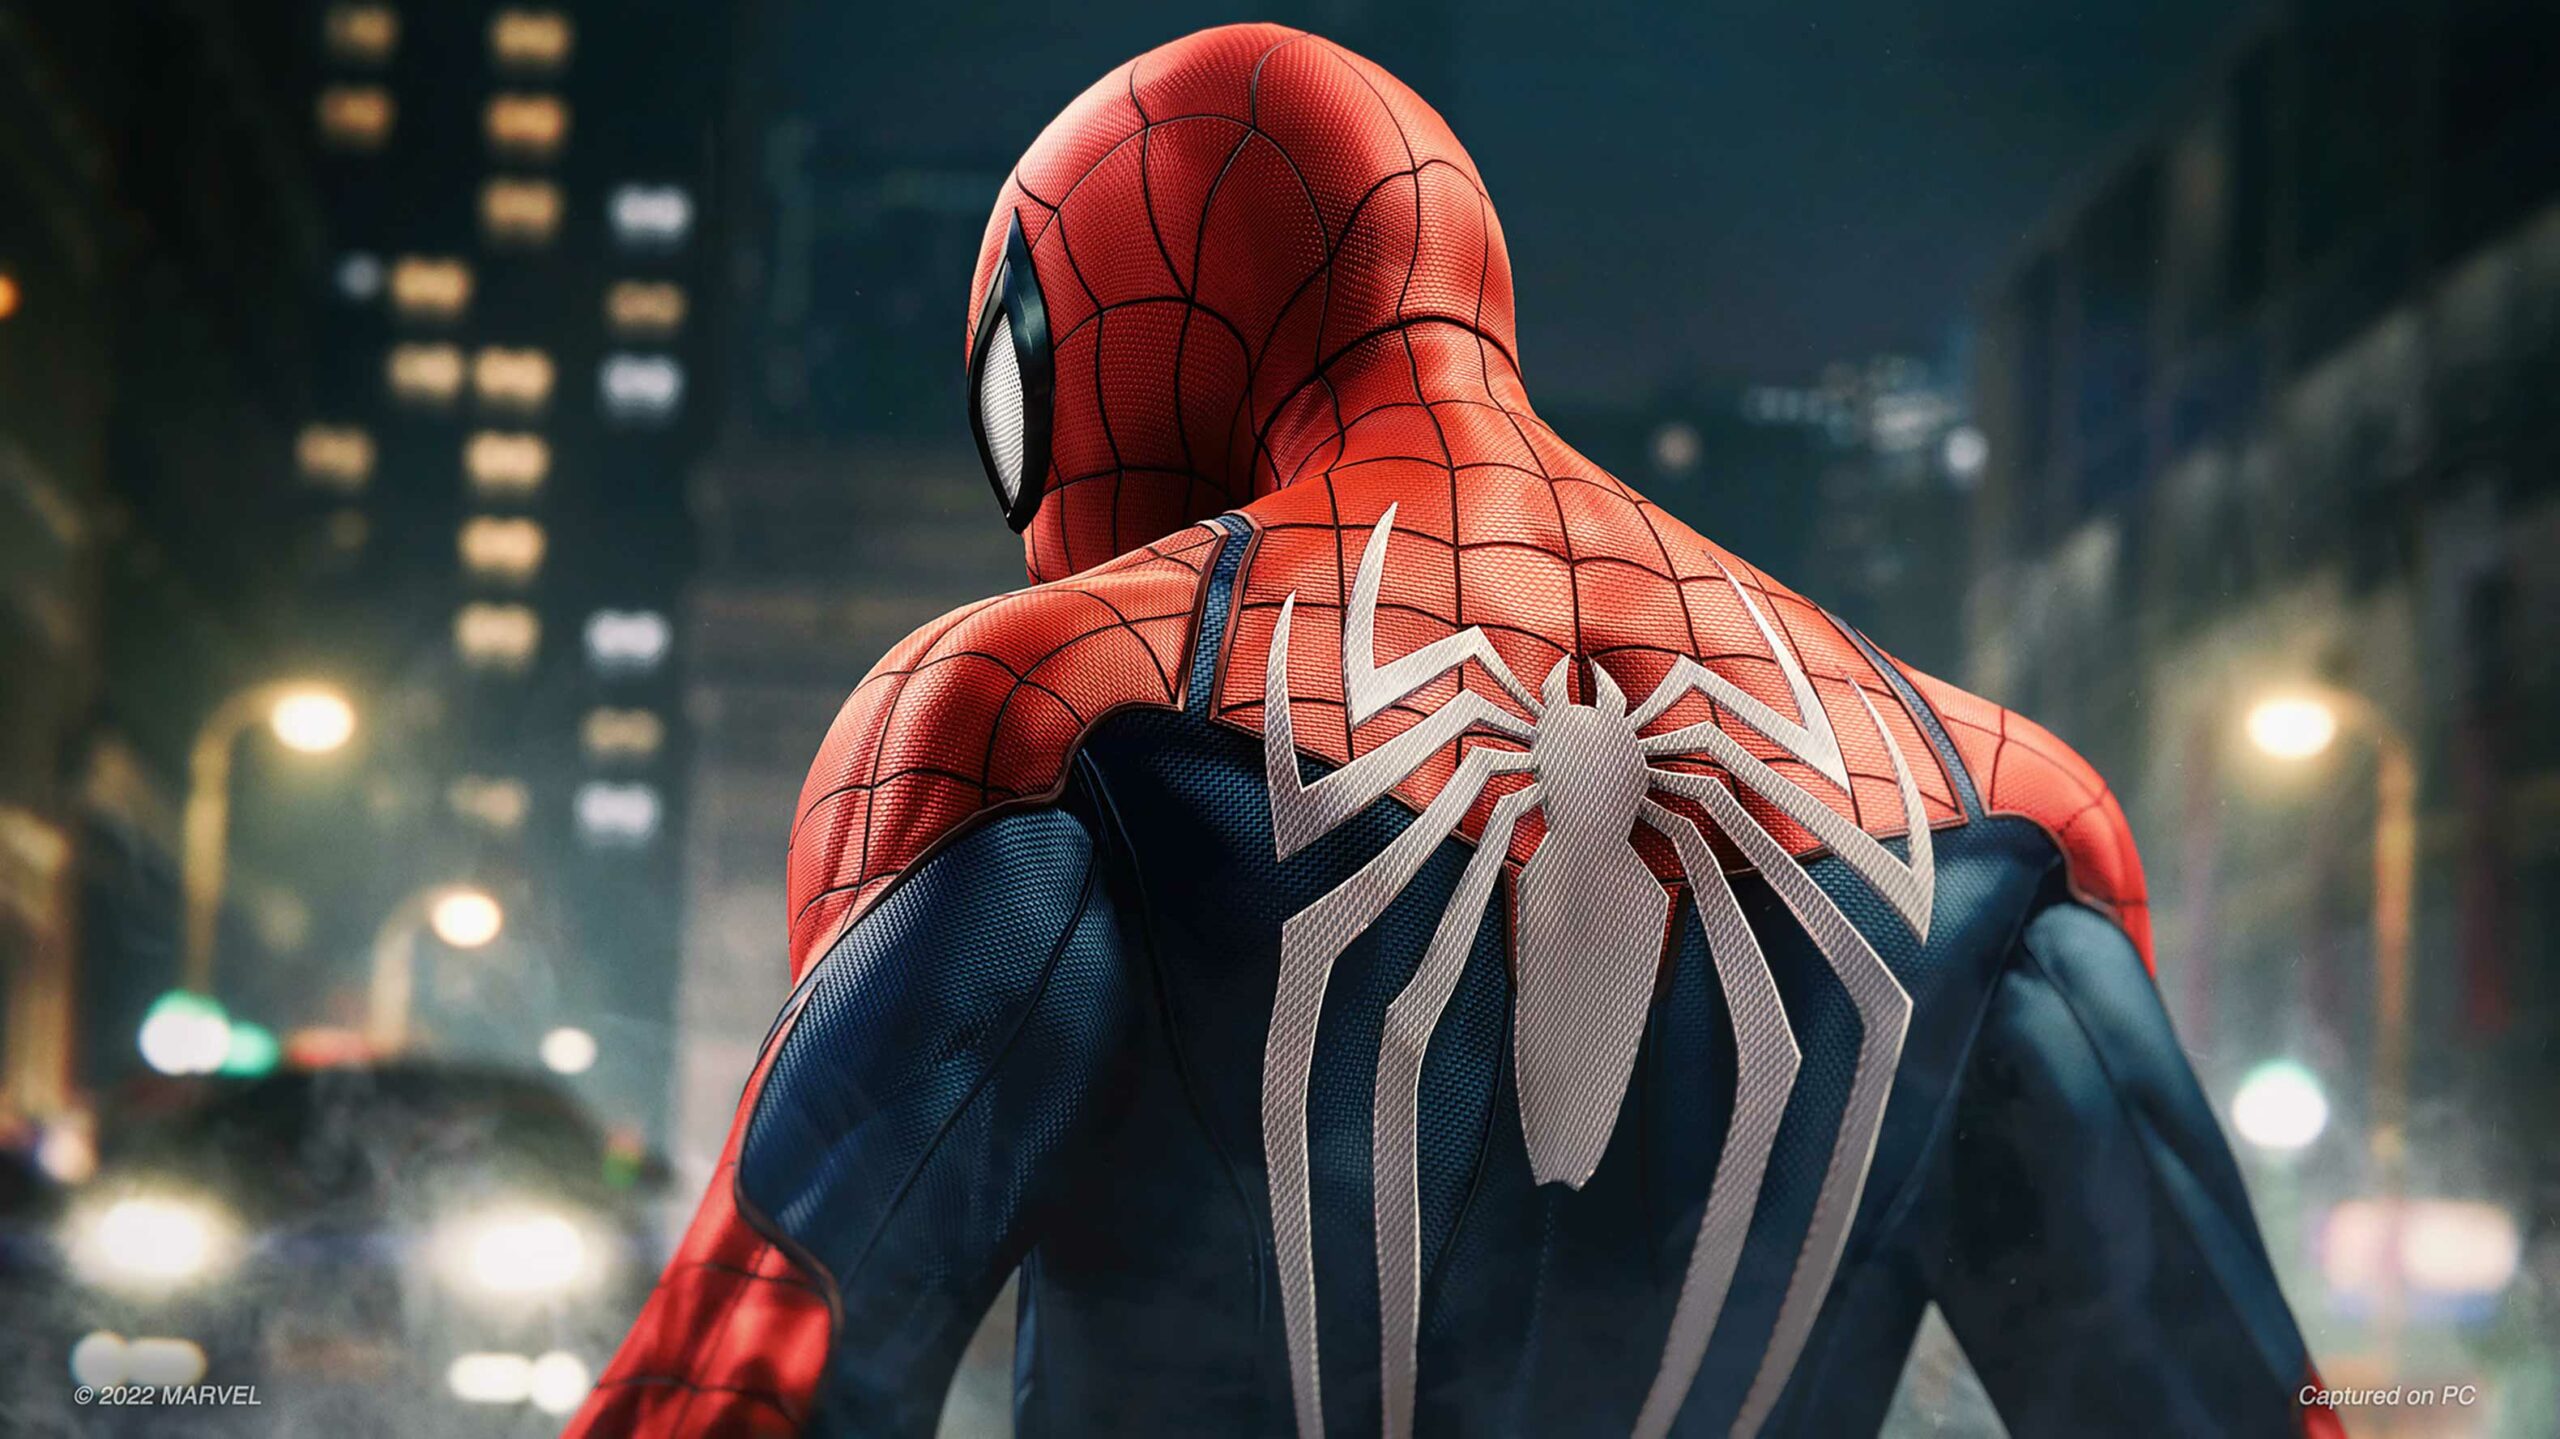 A shot of Spider-Man's white spider symbol on his back inMarvel's Spider-Man Remastered on PC